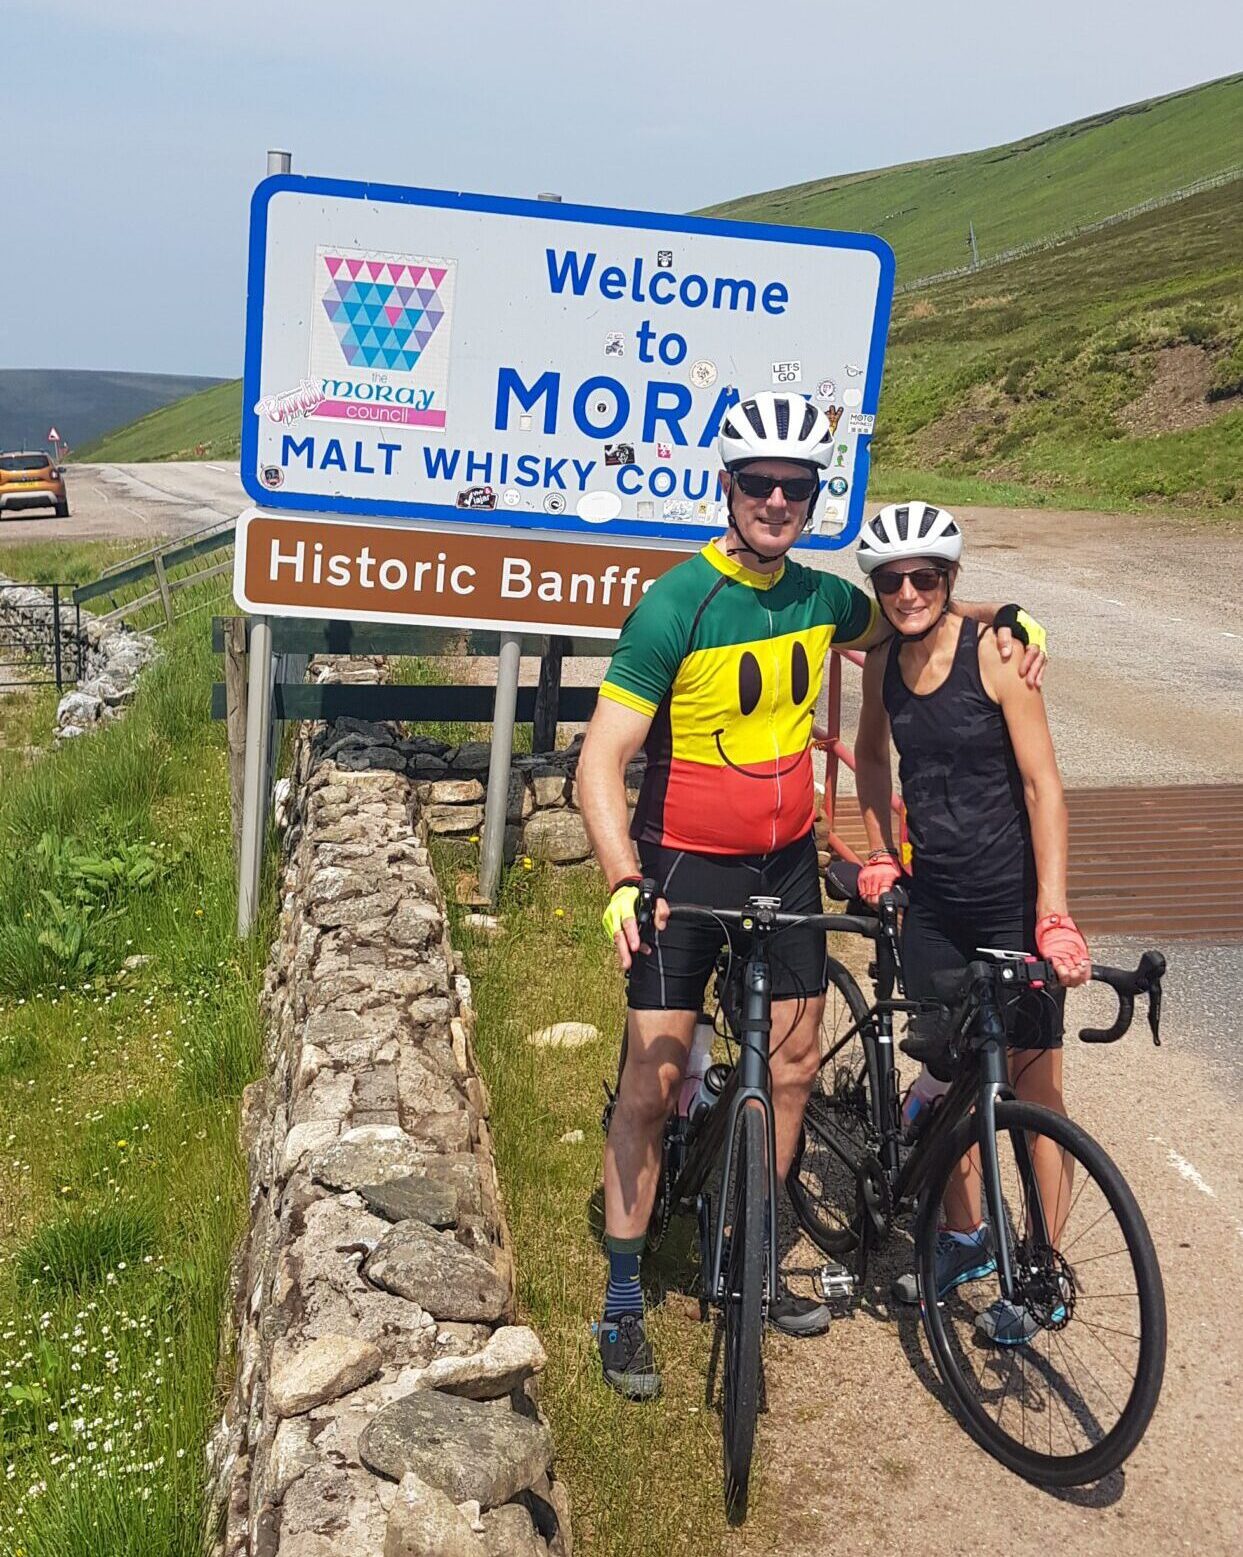 Two cyclists in front of a Malt Whisky Country sign